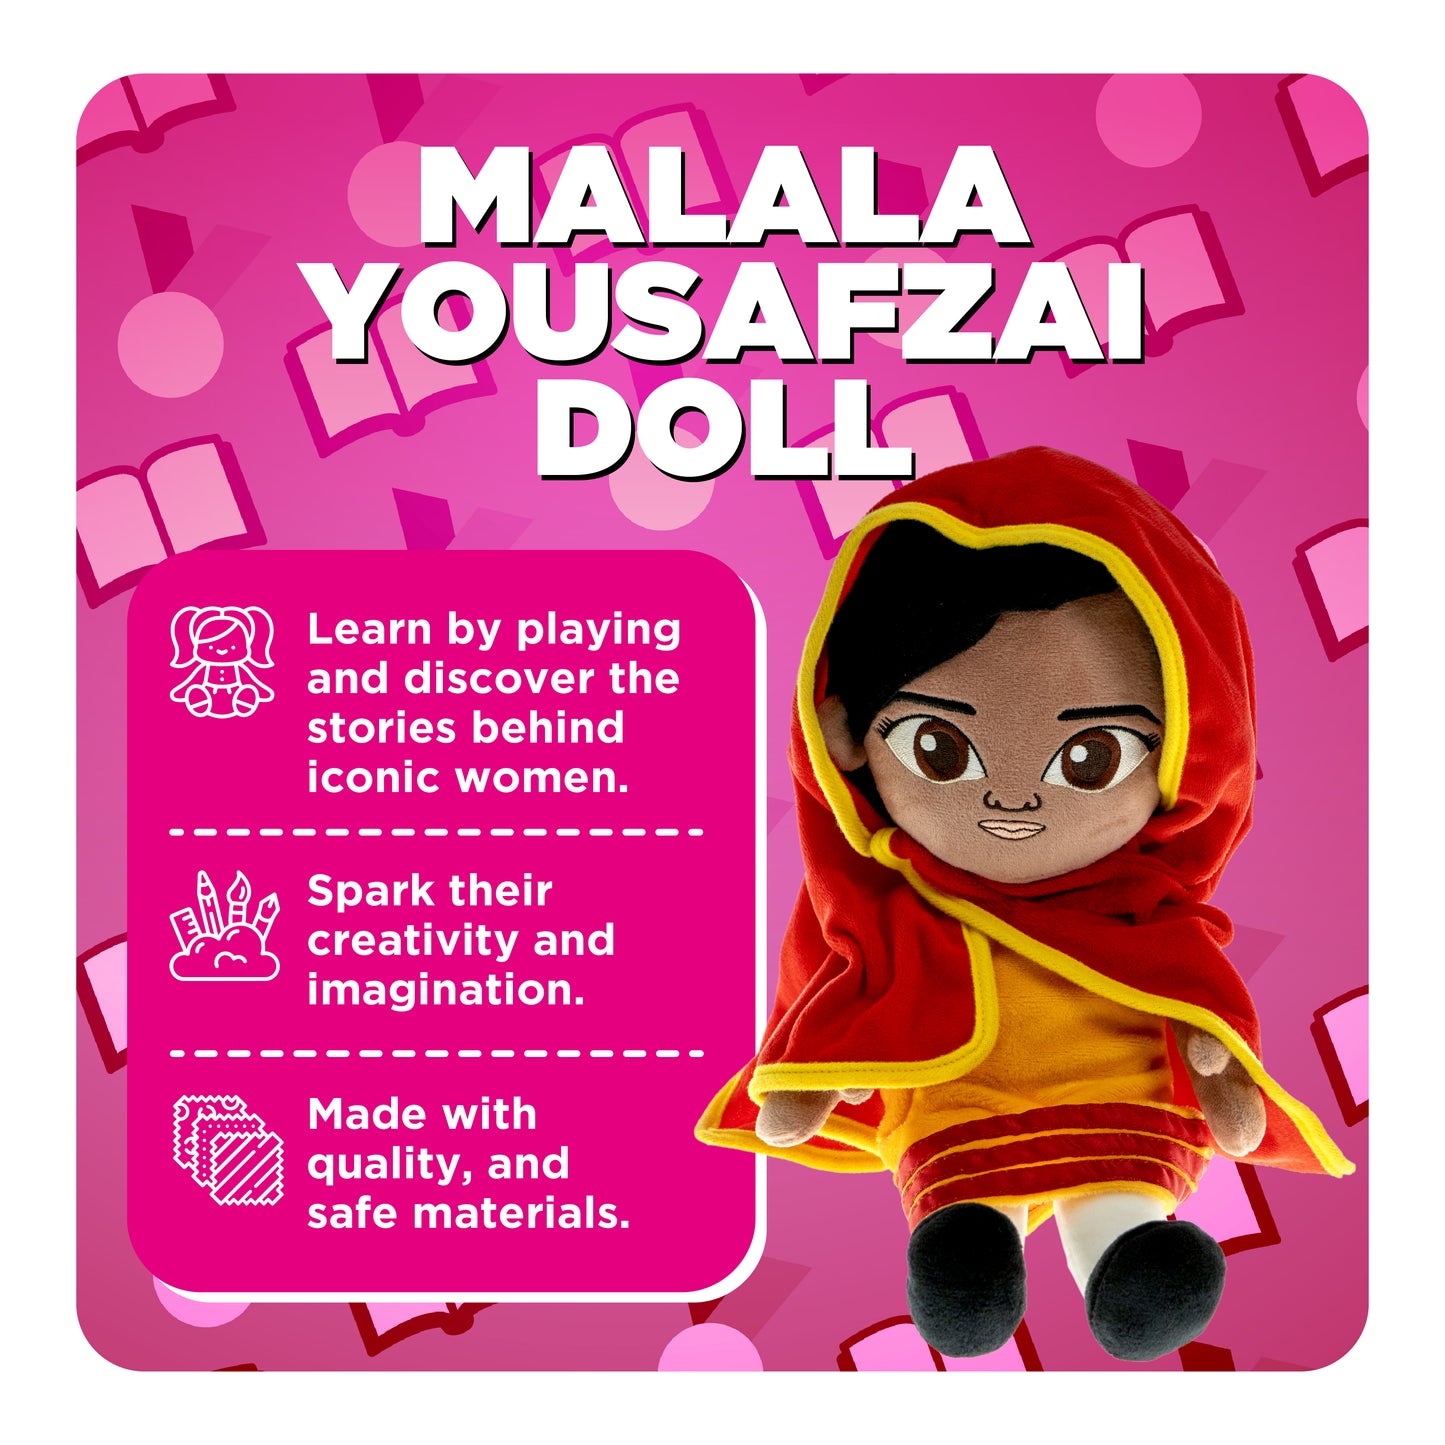 Empower Your Child's Education with the Malala Yousafzai Interactive Plush: A Toy That Inspires Learning and Courage!